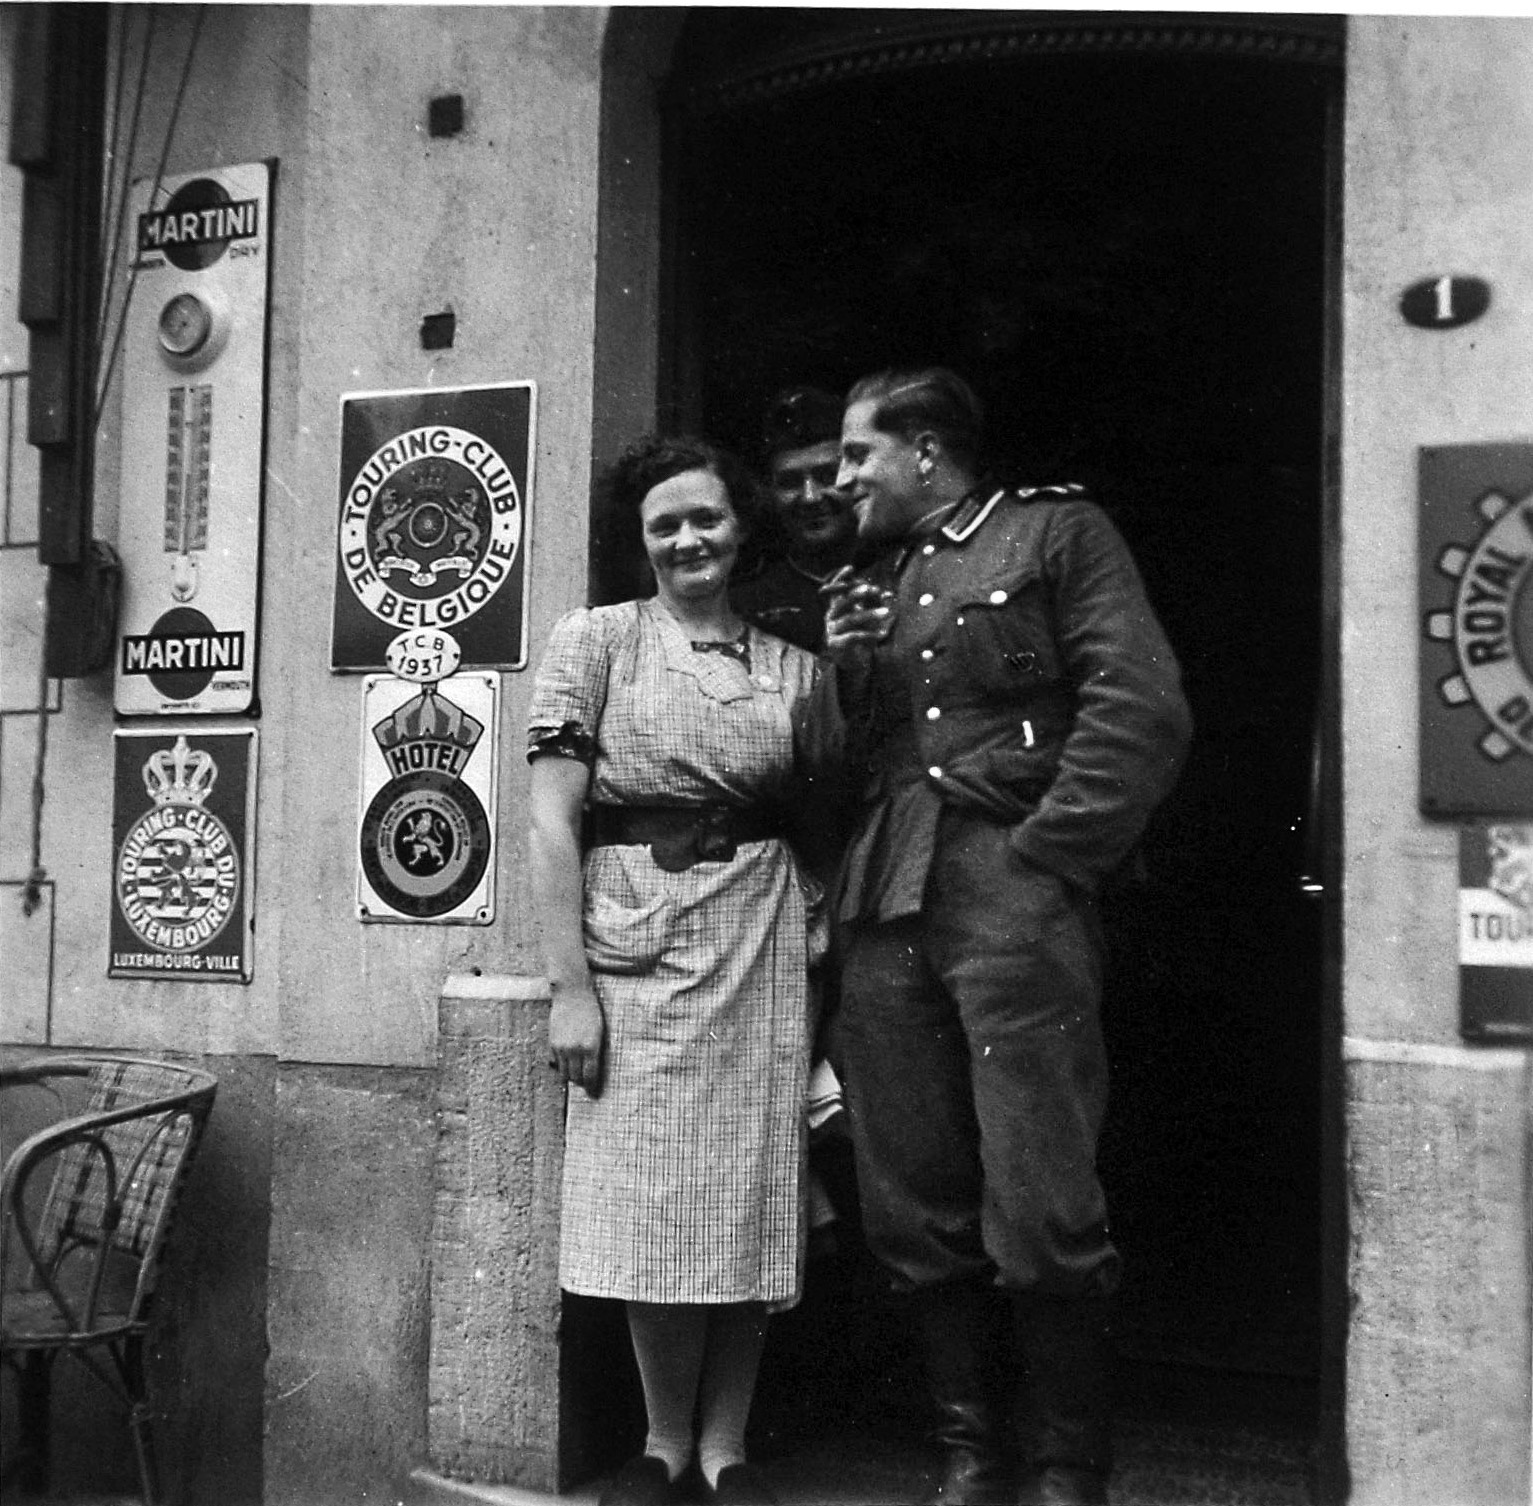 After the 1940 invasion of Belgium, attentive German soldiers make the acquaintance of a Belgian woman in the doorway of a hotel on whose walls are posted the signs of various tourist and automobile organizations. Fraternizing with the local female population was naturally a major point of interest for young German men in uniform; however, the postwar repercussions for “collaborationist” women were often very harsh.